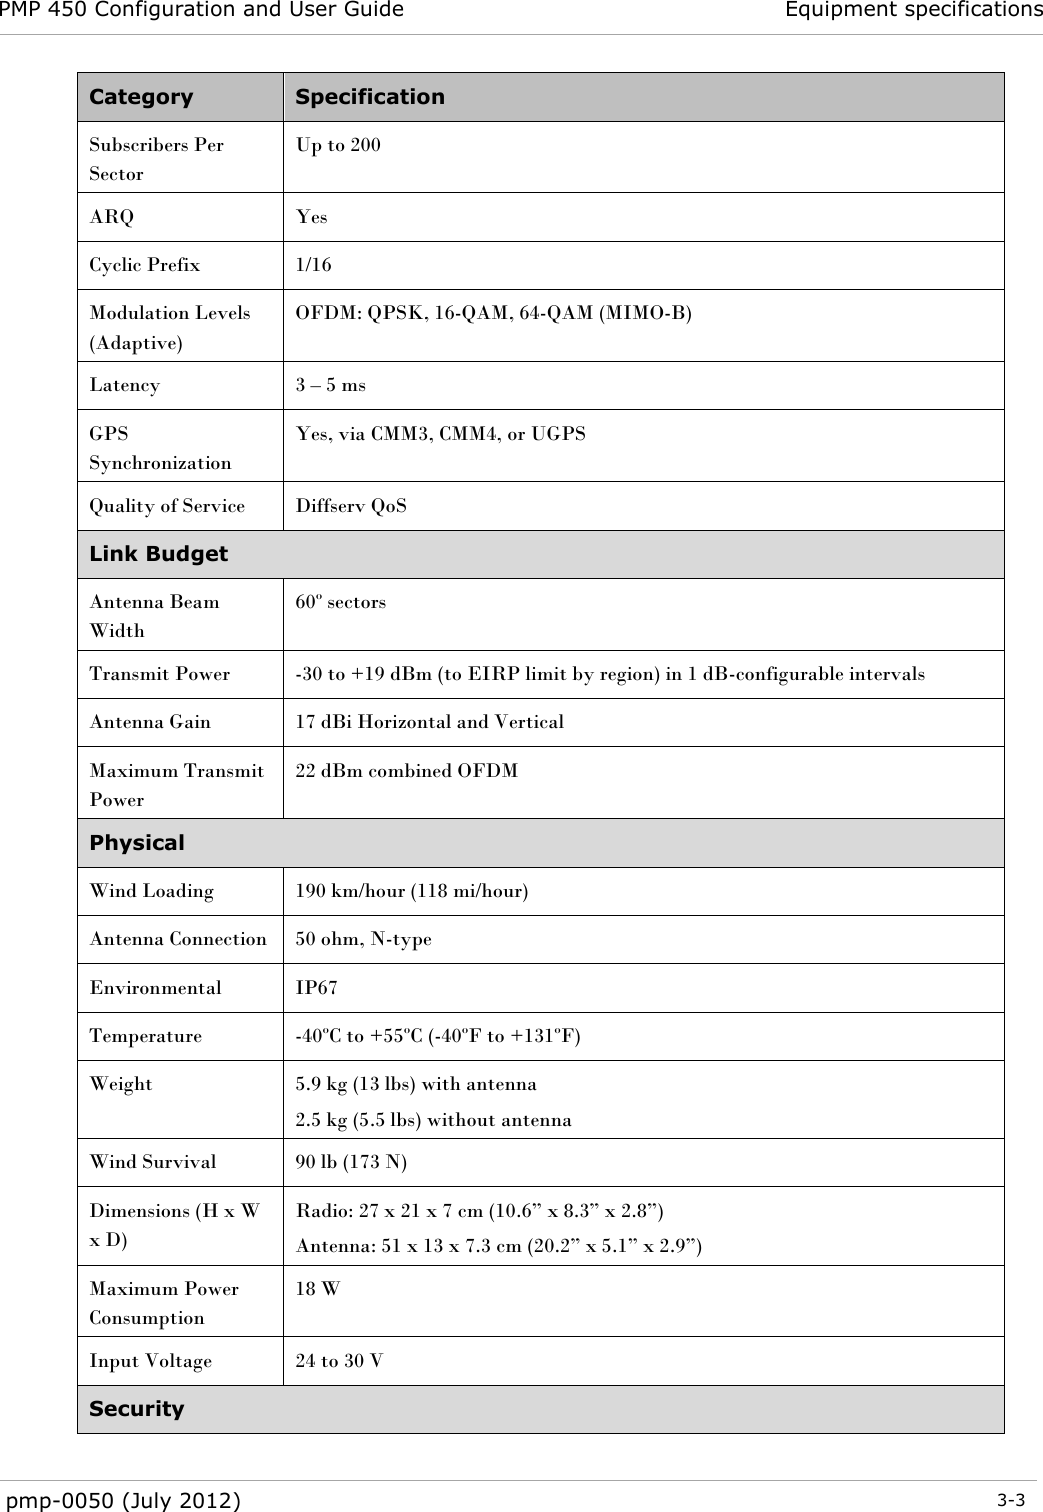 PMP 450 Configuration and User Guide Equipment specifications  pmp-0050 (July 2012)  3-3  Category Specification Subscribers Per Sector Up to 200 ARQ Yes Cyclic Prefix 1/16 Modulation Levels (Adaptive) OFDM: QPSK, 16-QAM, 64-QAM (MIMO-B) Latency 3 – 5 ms GPS Synchronization Yes, via CMM3, CMM4, or UGPS Quality of Service Diffserv QoS Link Budget Antenna Beam Width 60º sectors Transmit Power -30 to +19 dBm (to EIRP limit by region) in 1 dB-configurable intervals Antenna Gain 17 dBi Horizontal and Vertical Maximum Transmit Power 22 dBm combined OFDM Physical Wind Loading 190 km/hour (118 mi/hour) Antenna Connection 50 ohm, N-type Environmental IP67 Temperature -40ºC to +55ºC (-40ºF to +131ºF) Weight 5.9 kg (13 lbs) with antenna 2.5 kg (5.5 lbs) without antenna Wind Survival 90 lb (173 N) Dimensions (H x W x D) Radio: 27 x 21 x 7 cm (10.6‖ x 8.3‖ x 2.8‖) Antenna: 51 x 13 x 7.3 cm (20.2‖ x 5.1‖ x 2.9‖) Maximum Power Consumption 18 W Input Voltage 24 to 30 V Security 